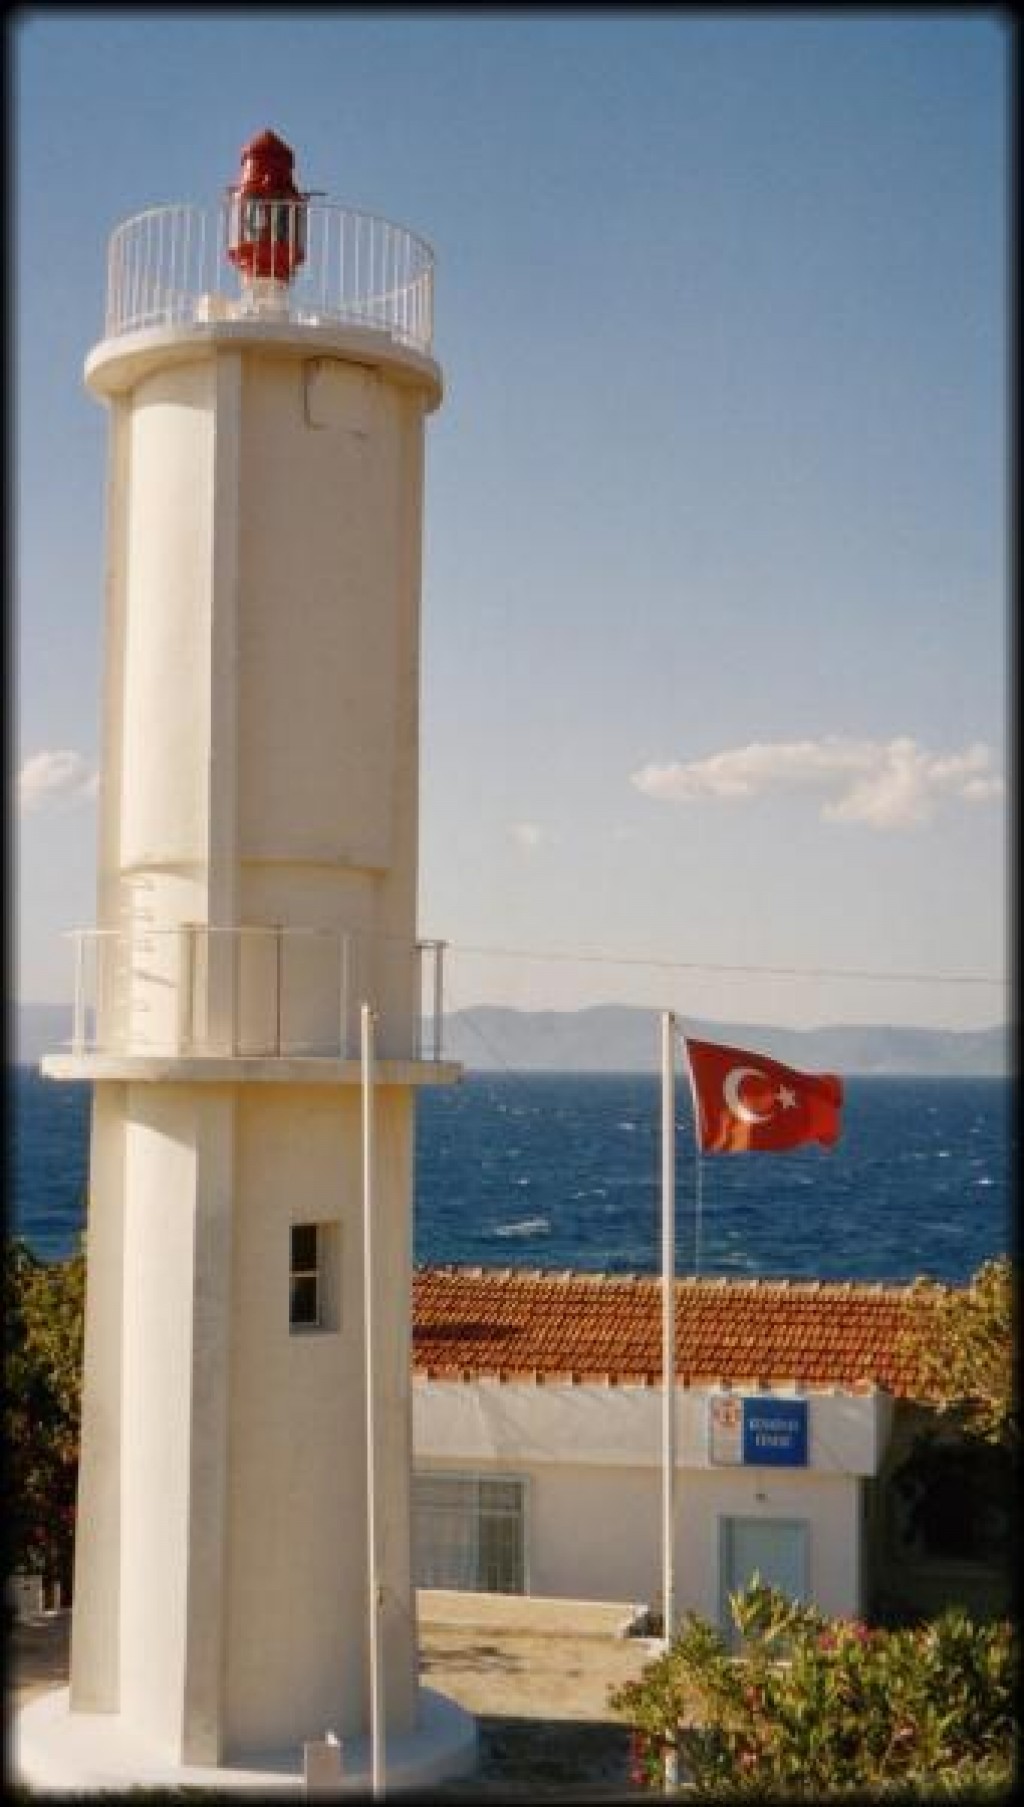 This is a lighthouse at the tip of the island.